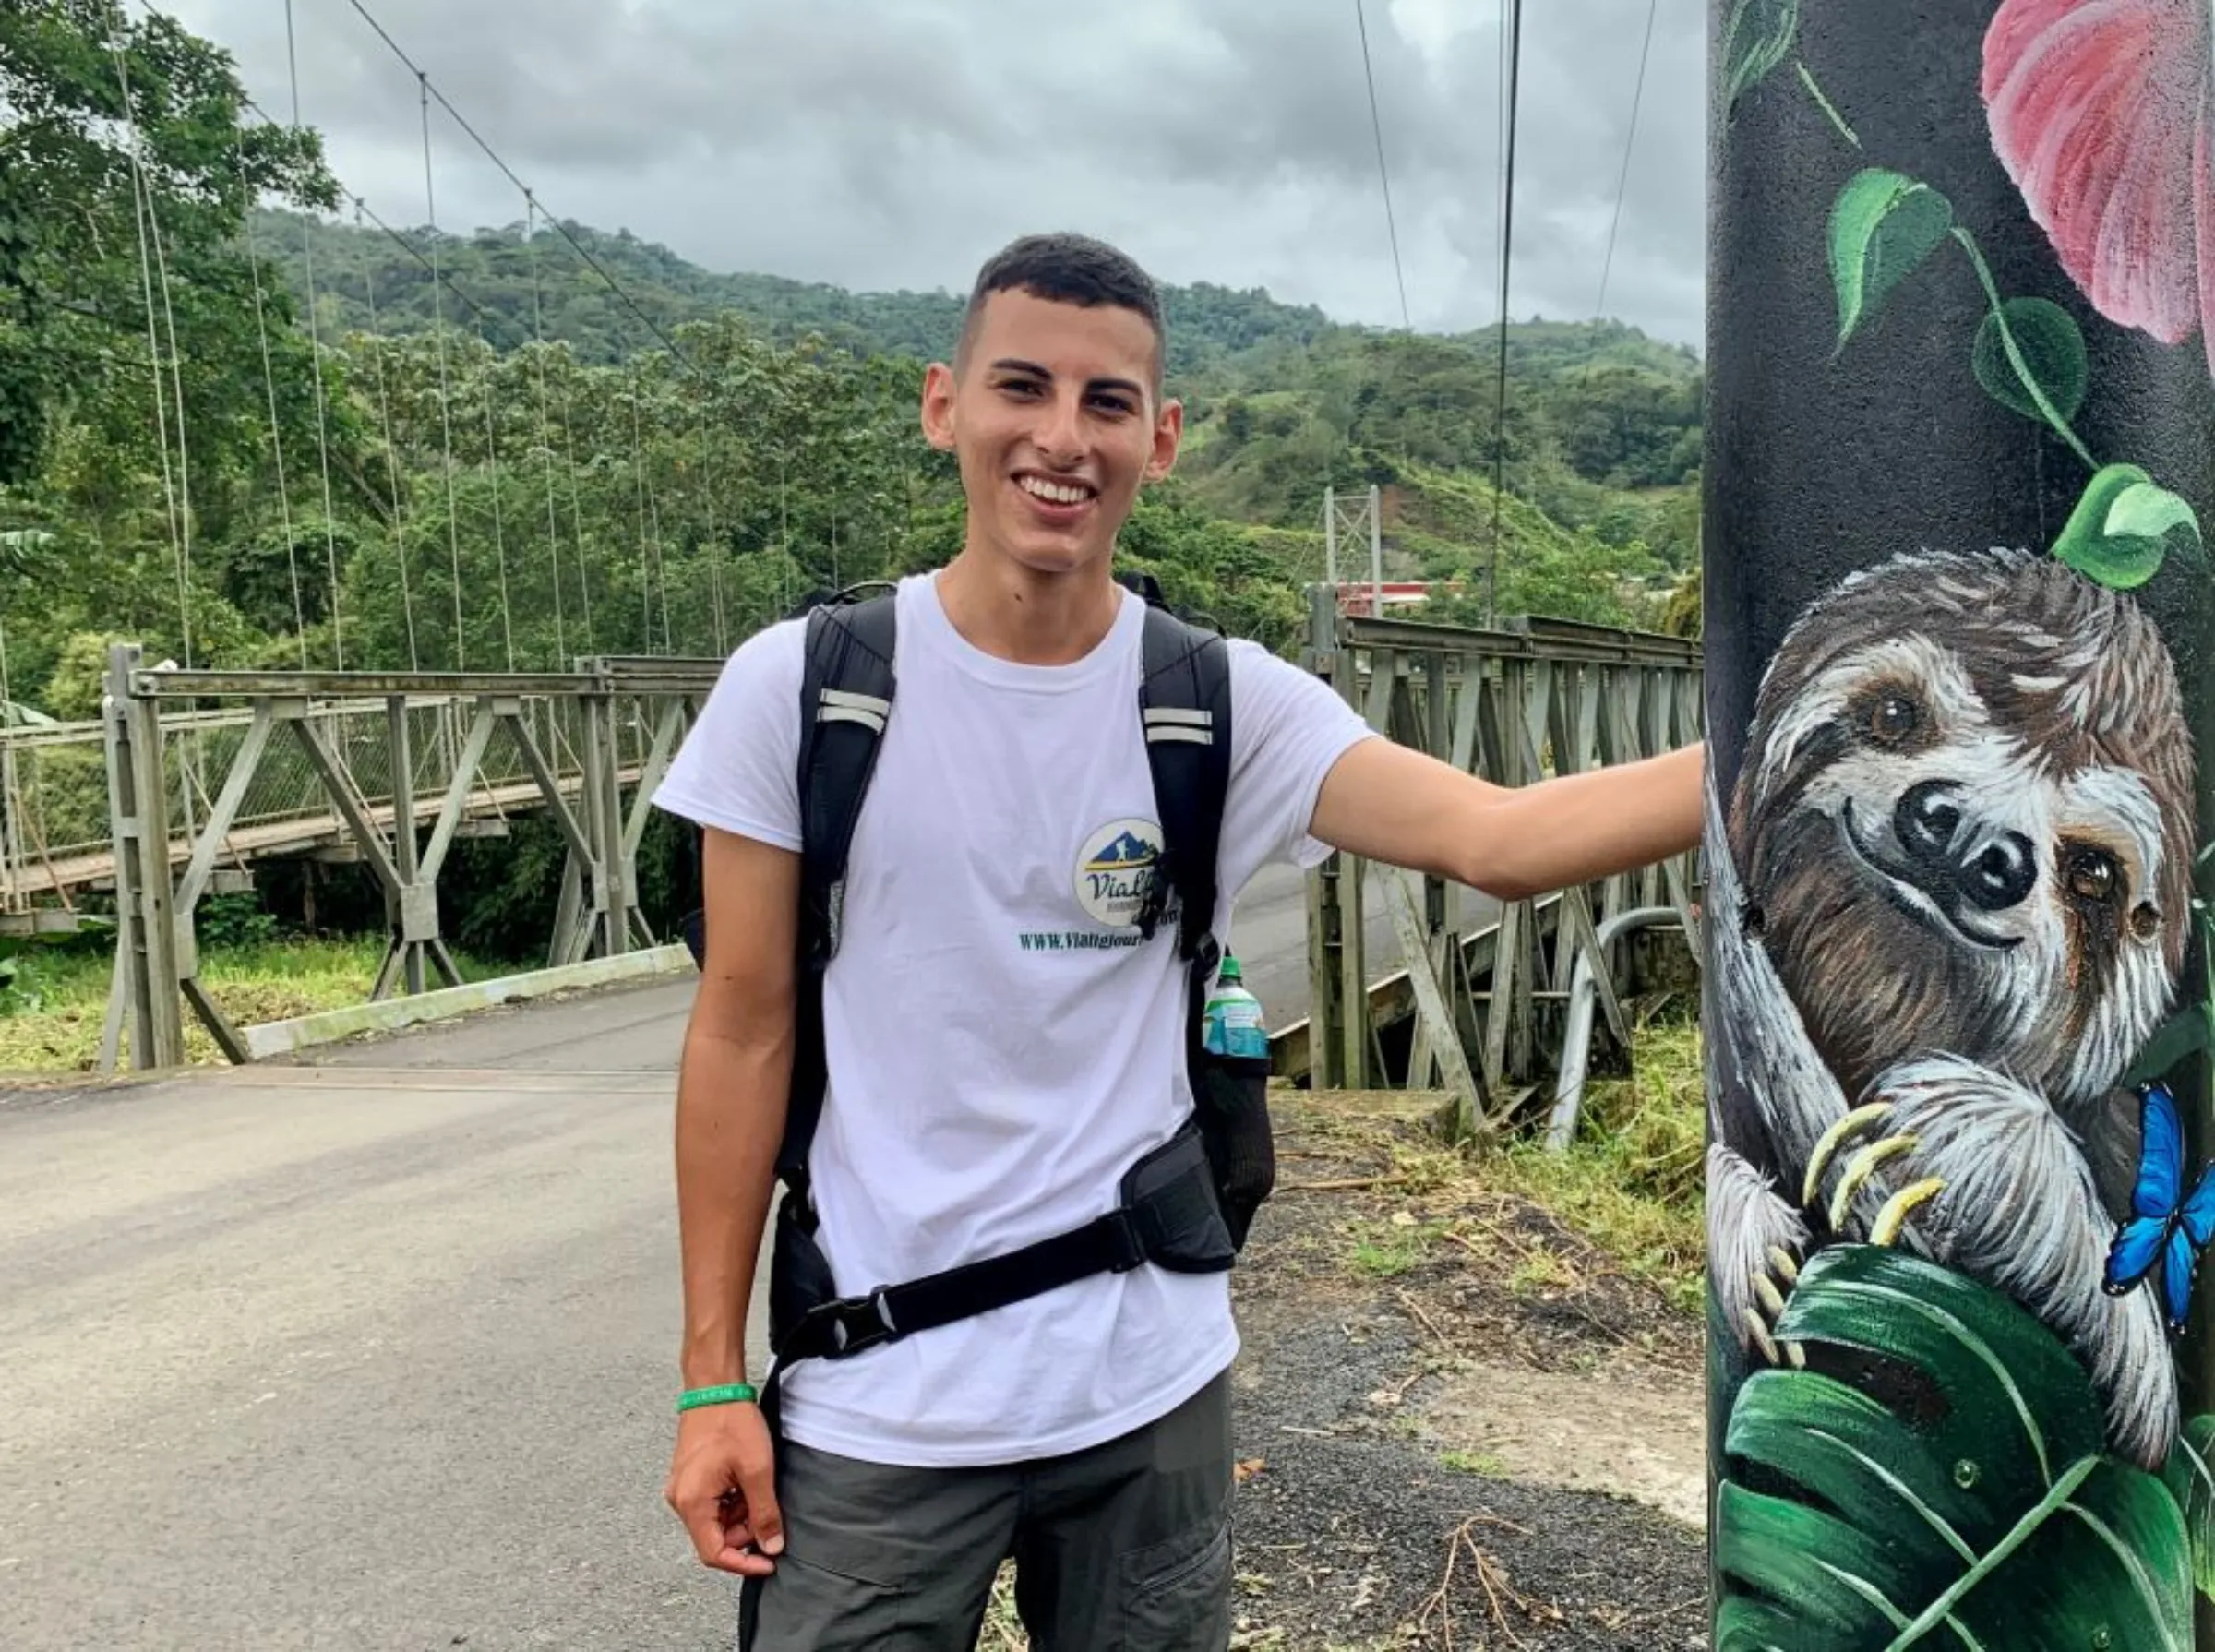 Guide Alejandro Montoya stands beside a bridge in the Costa Rica’s Central Valley, November, 8 2022. The valley lies on the 174-mile Camino de Costa Rica footpath, that starts in Barra de Pacuare and finishes in Quepos, on the Pacific